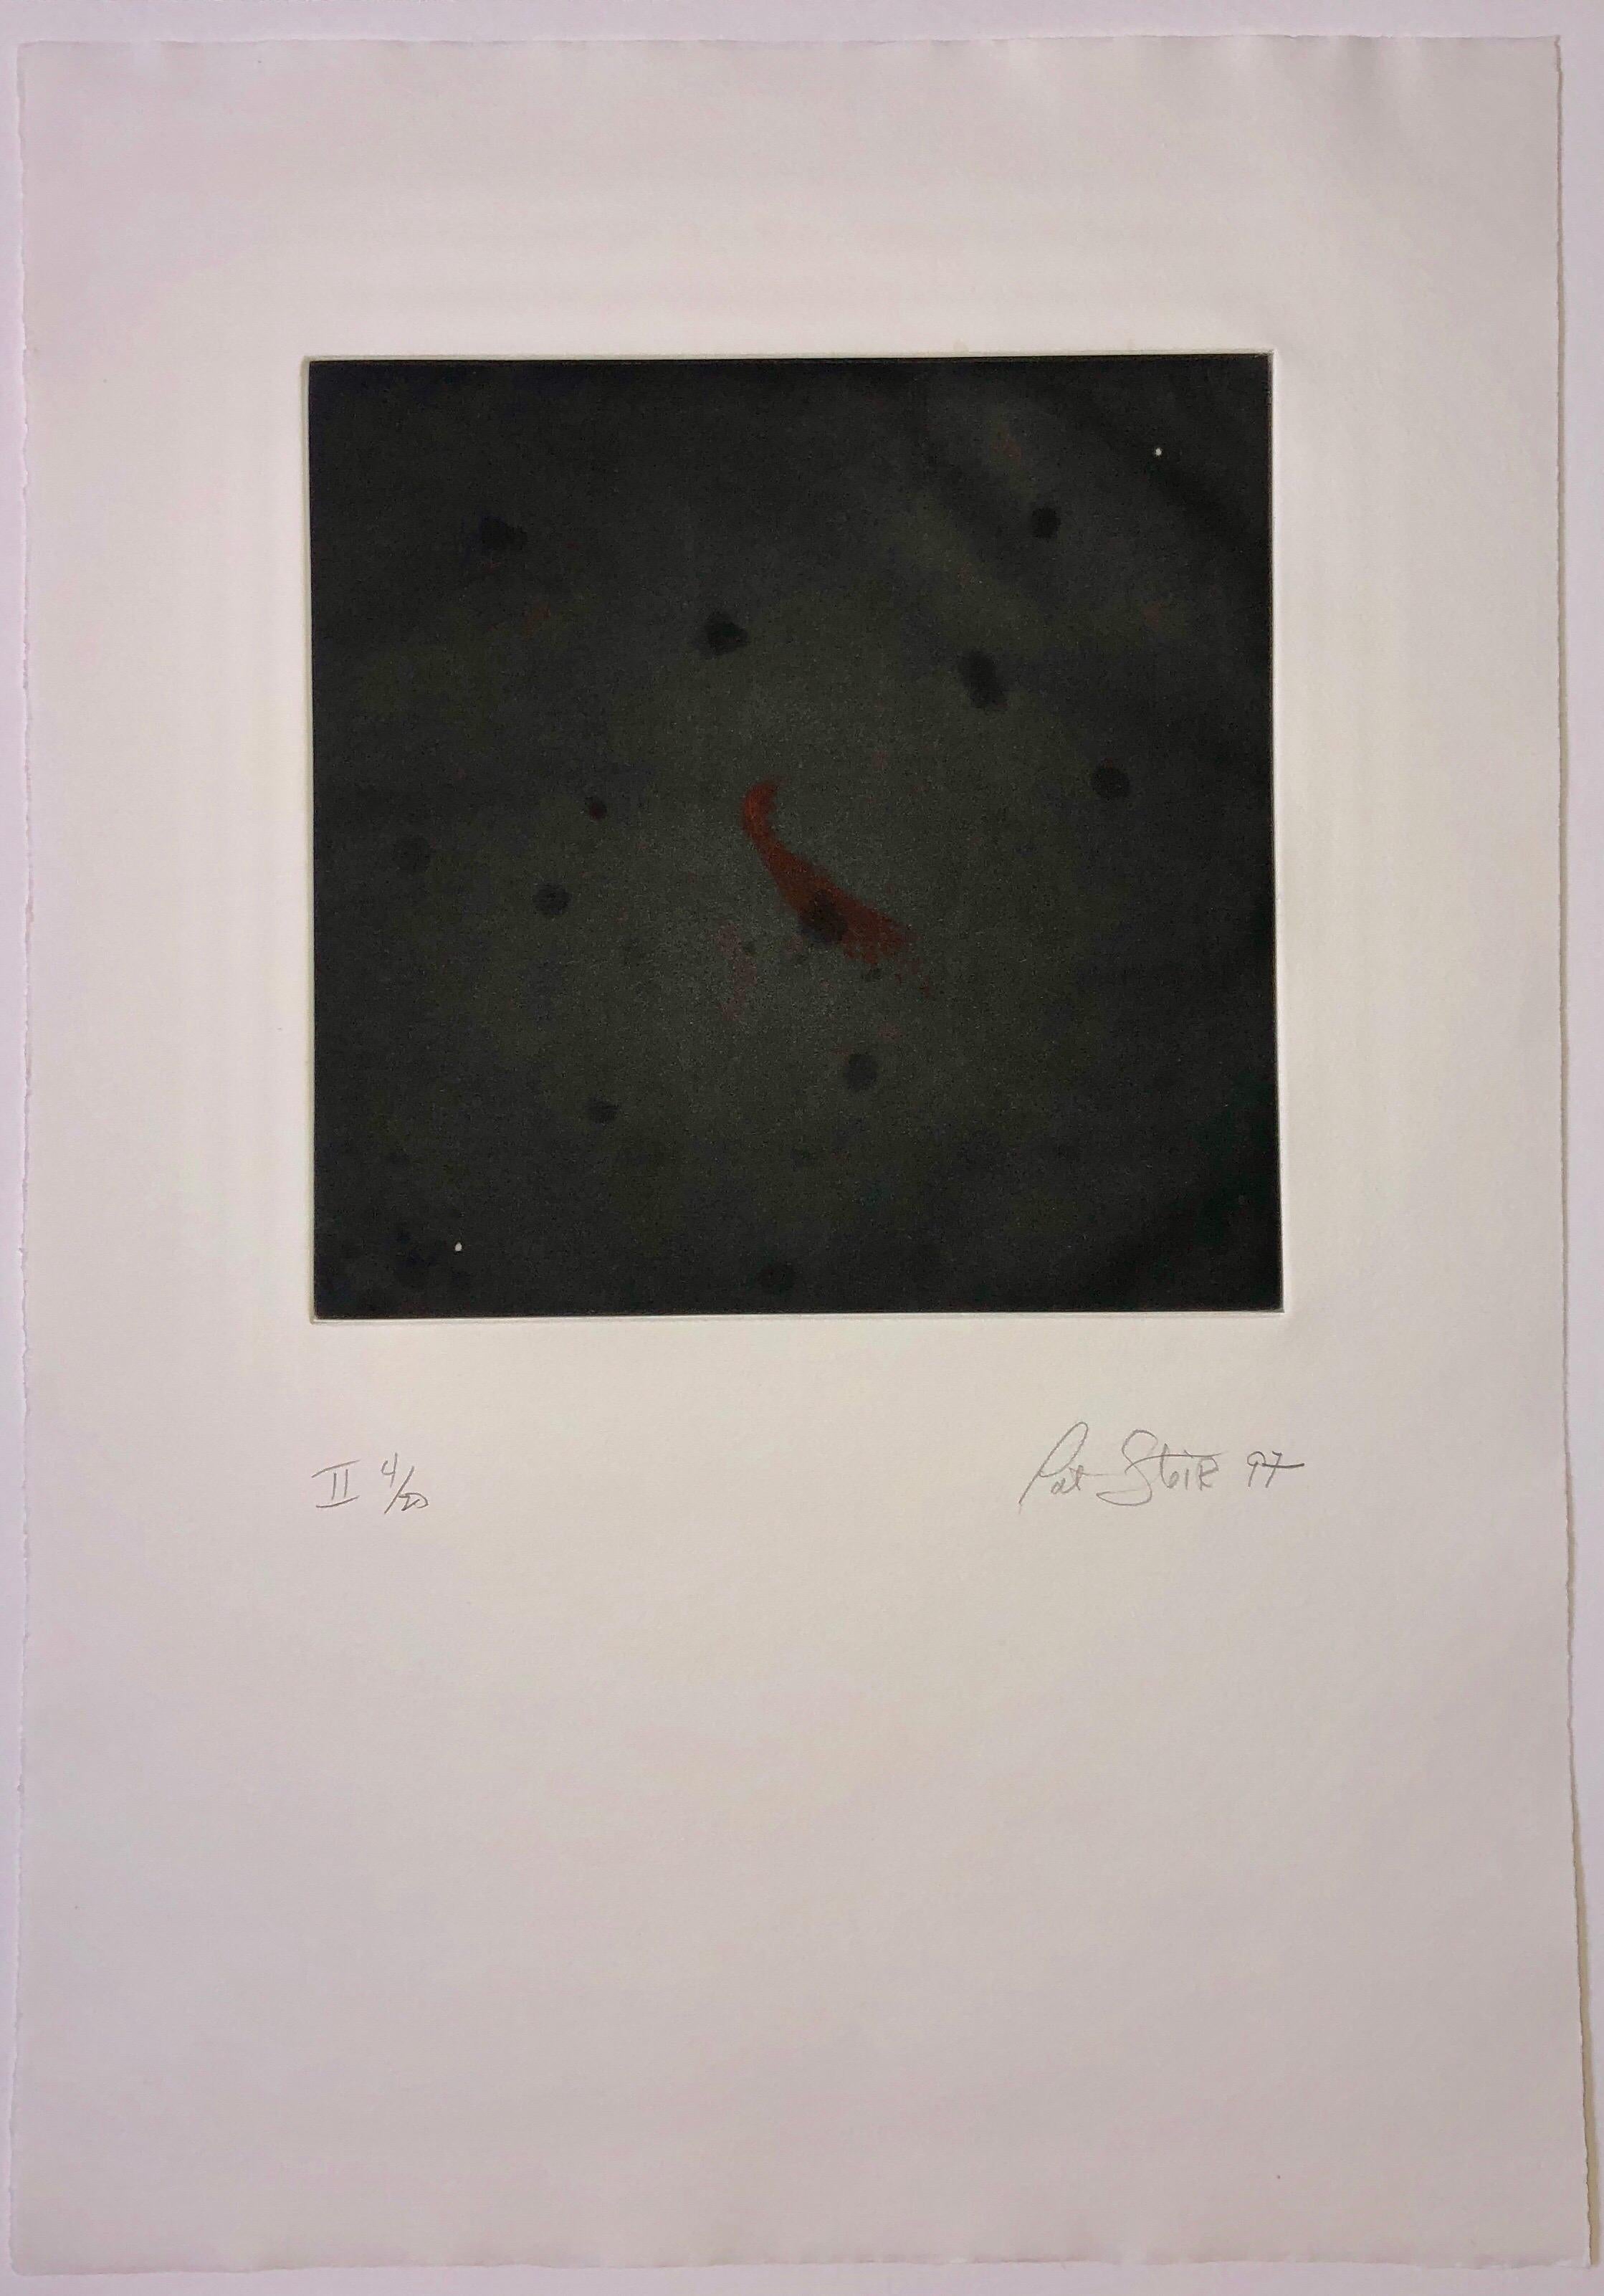 Comet, Outer Space Dark Series Aquatint Etching Color Abstract Expressionist  For Sale 3